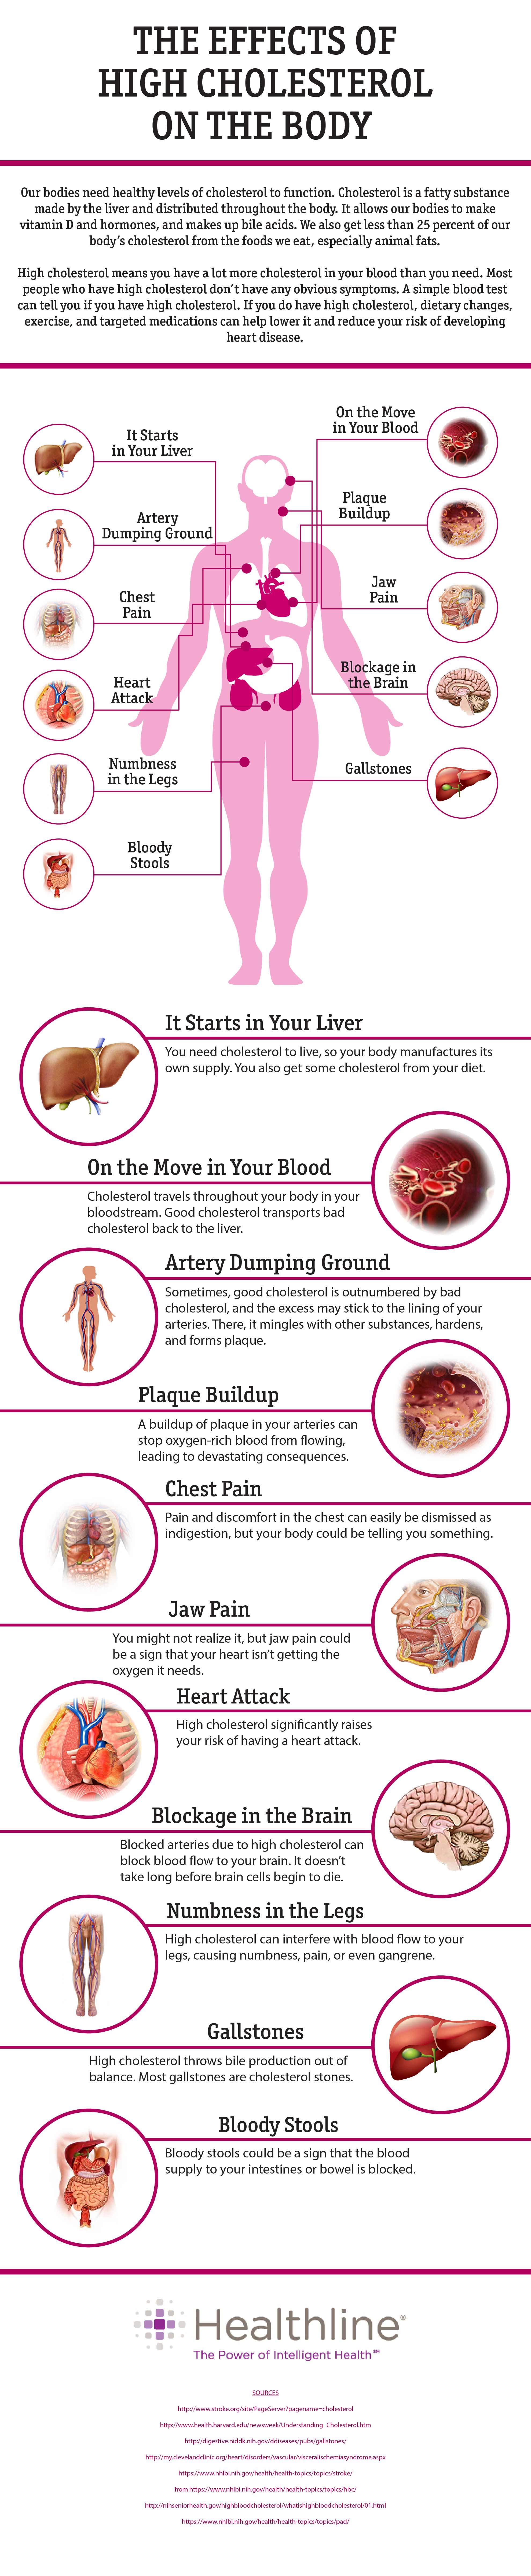 The Effects of High Cholesterol on the Body